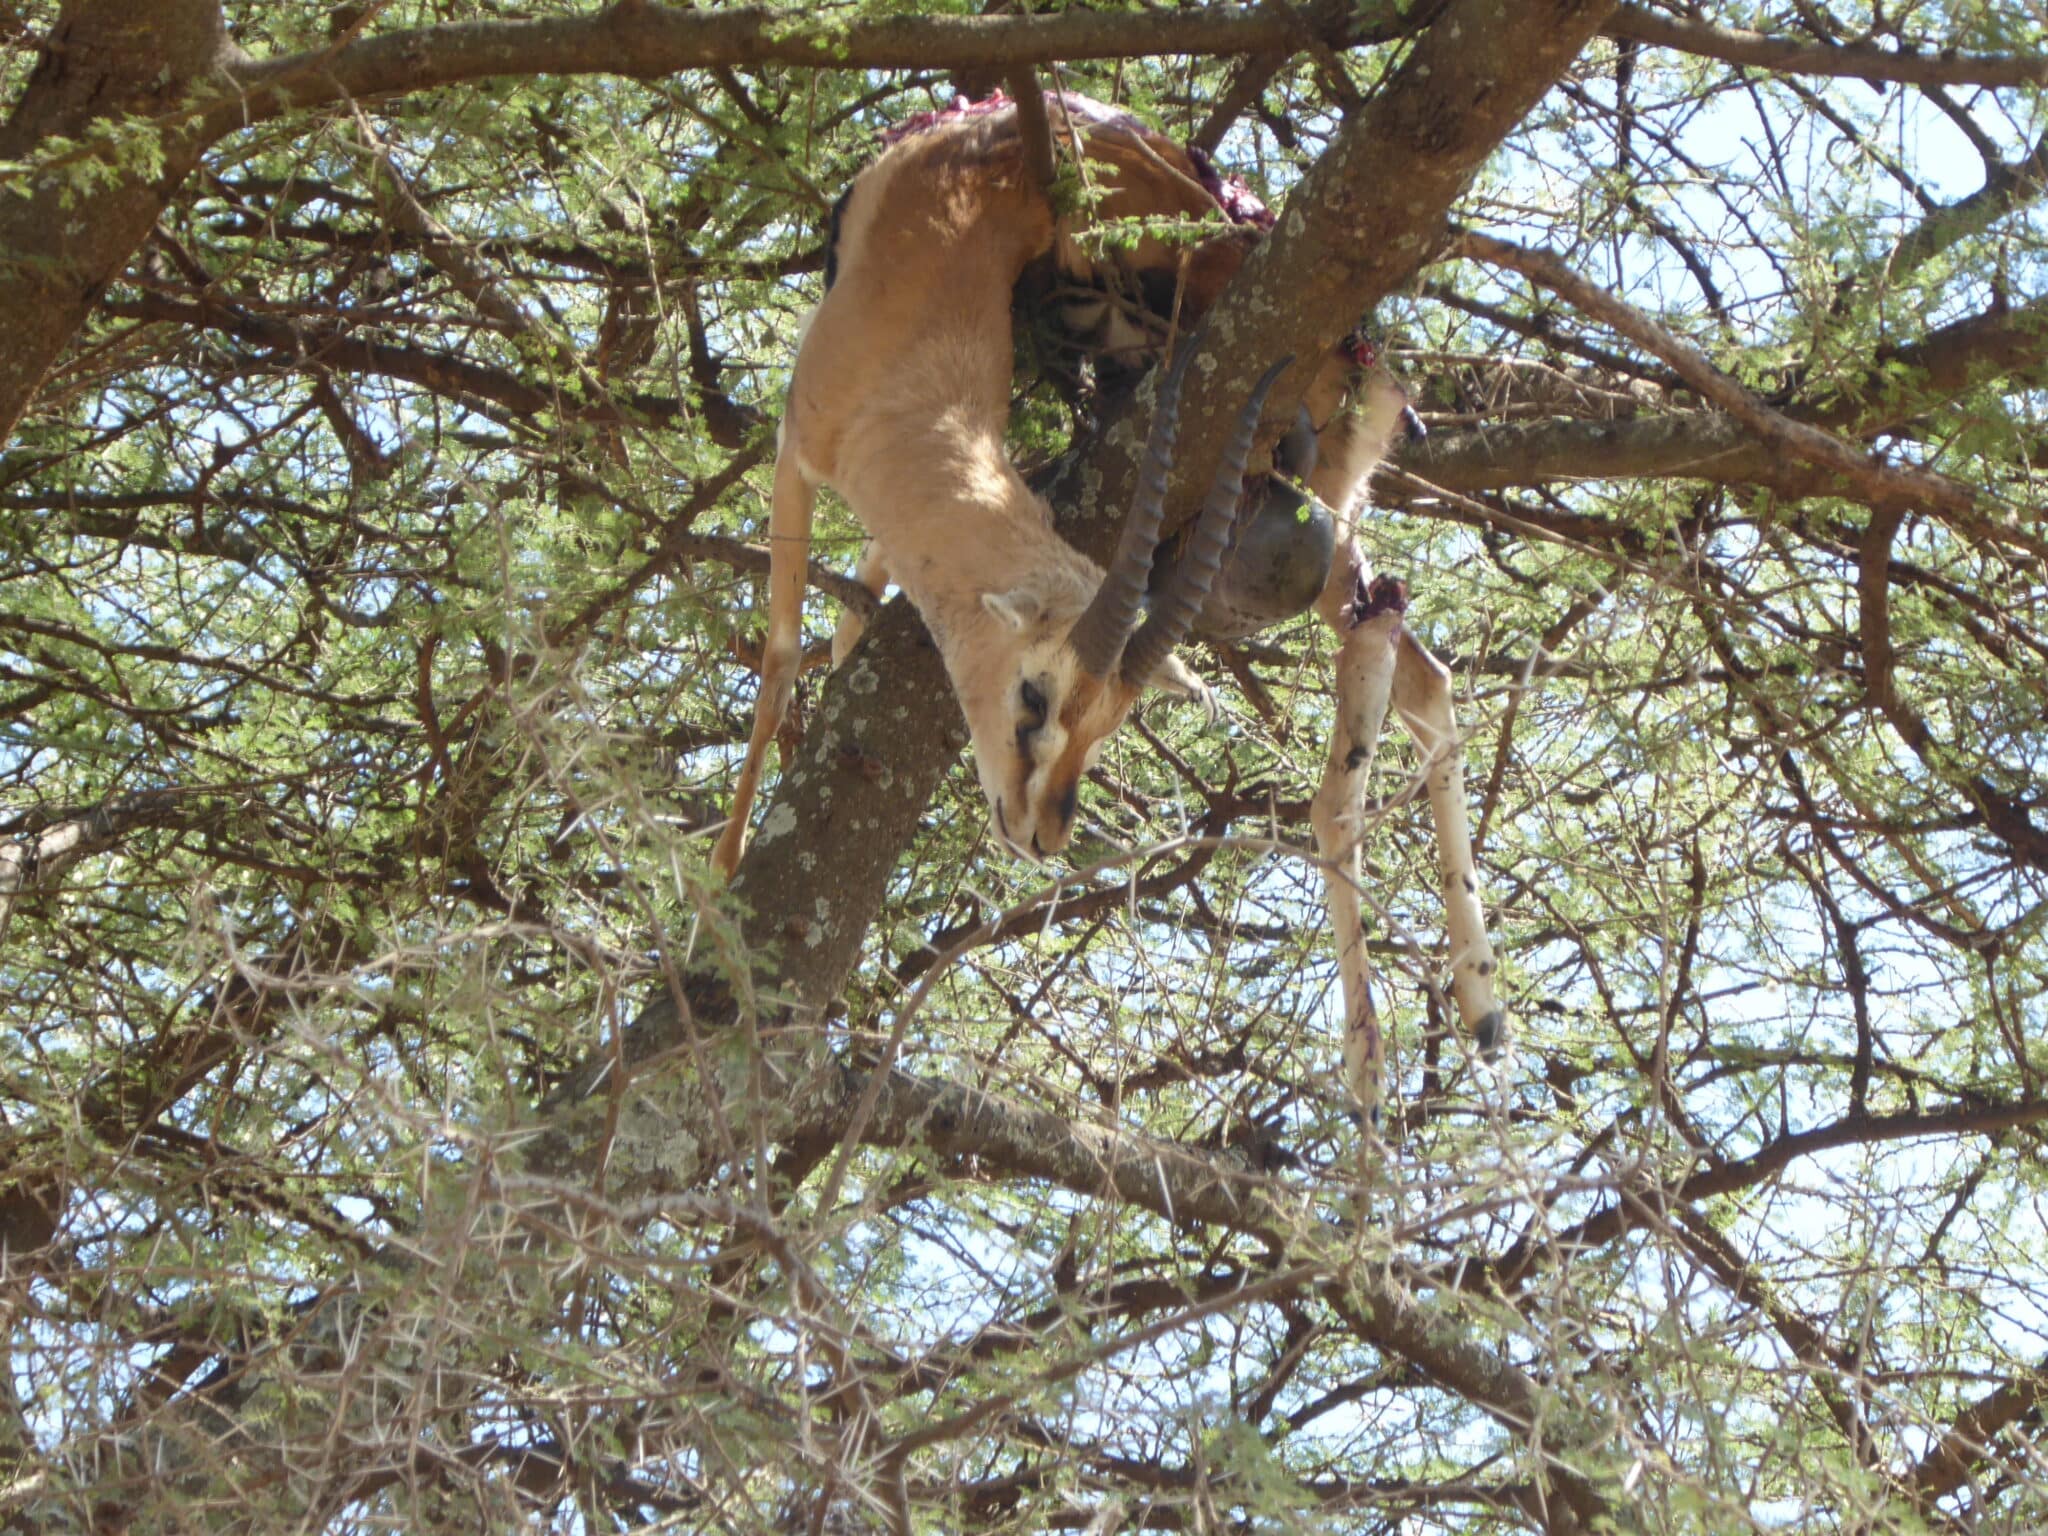 A killed gazelle stashed high in a tree by a leopard for snacking (Credit: Nancy Sharkey)